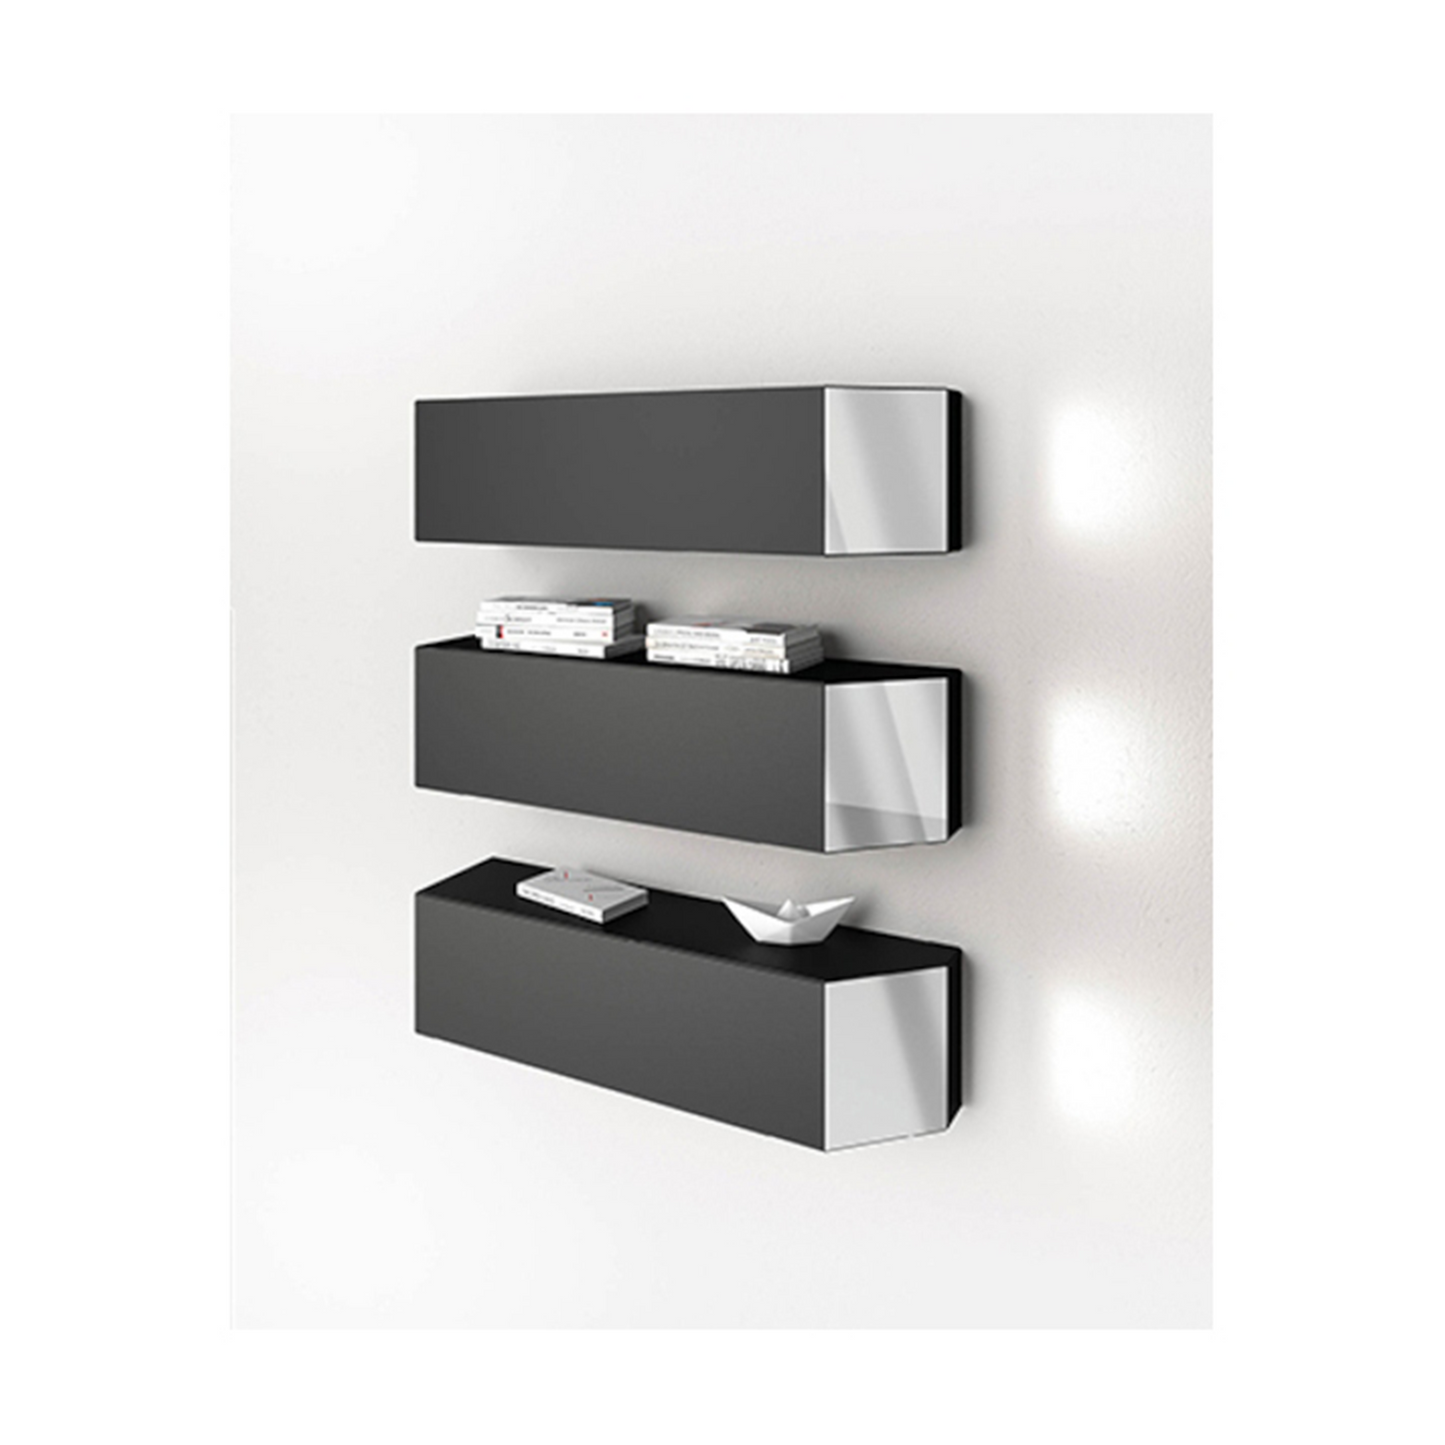 Three wall mounted storage containers with mirrors.